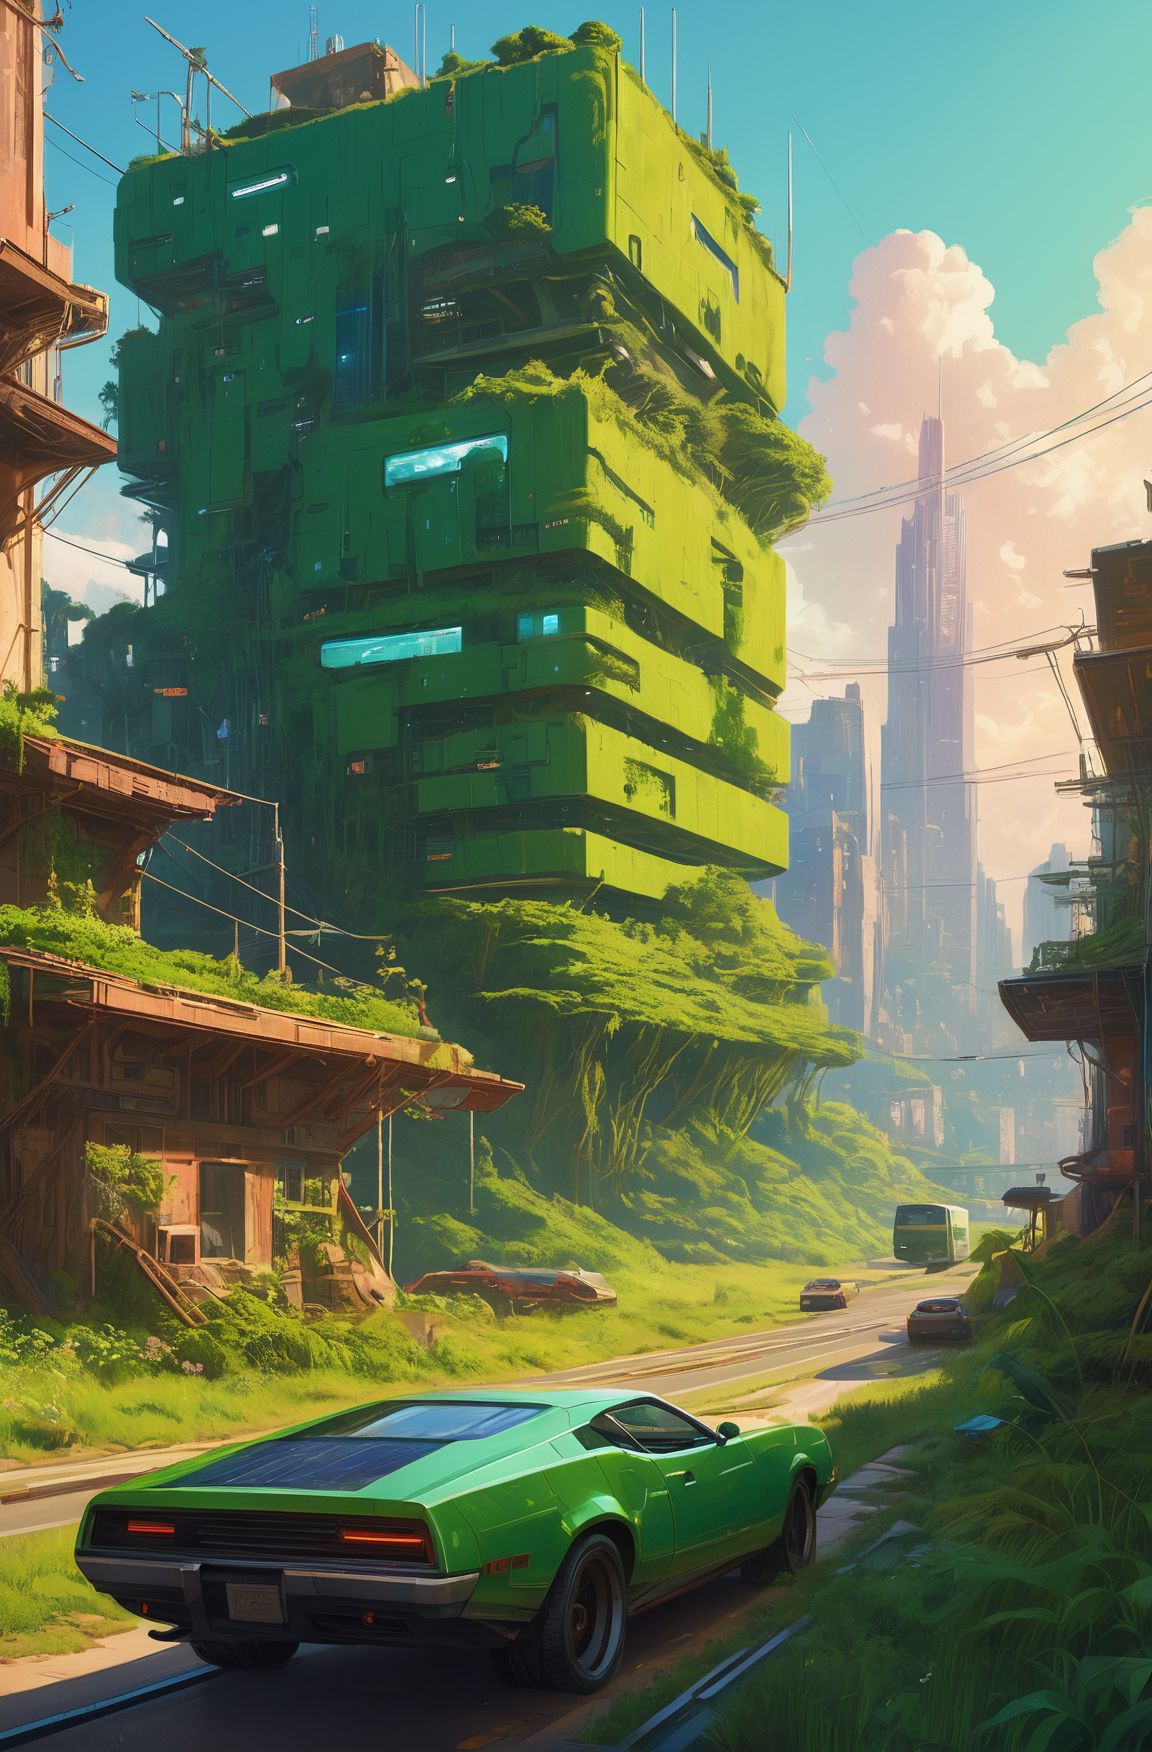 a cinematic composition depicting : we're overlooking a cyberpunk civilization in the valley with overgrown buildings, whe...